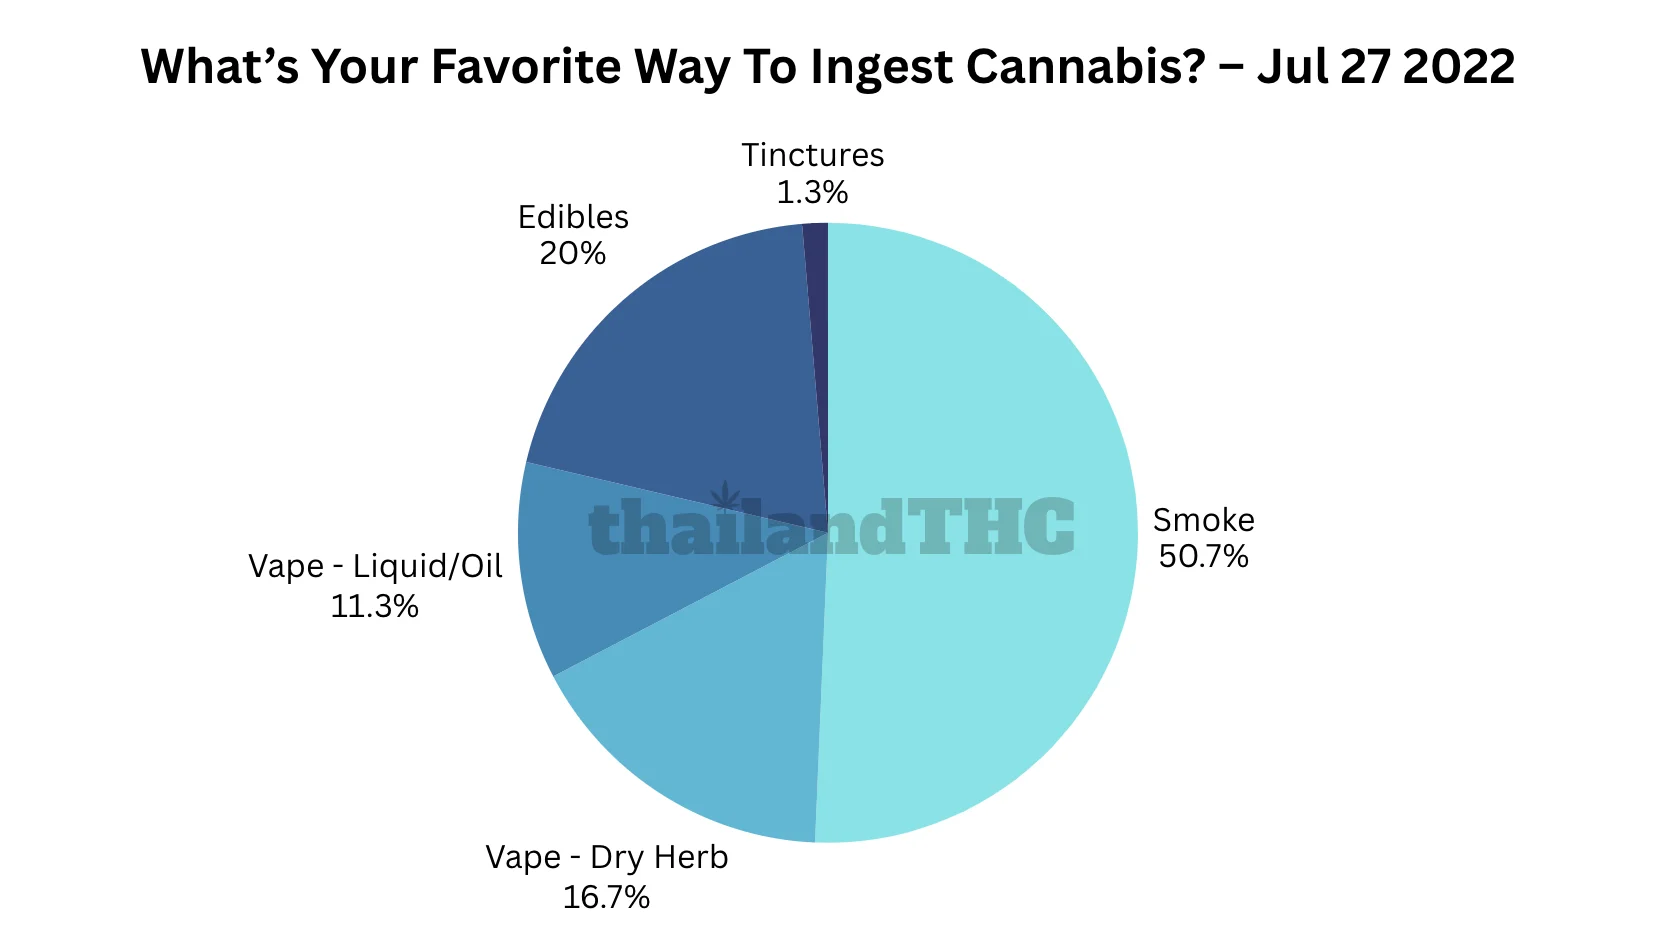 What’s Your Favorite Way To Ingest Cannabis?